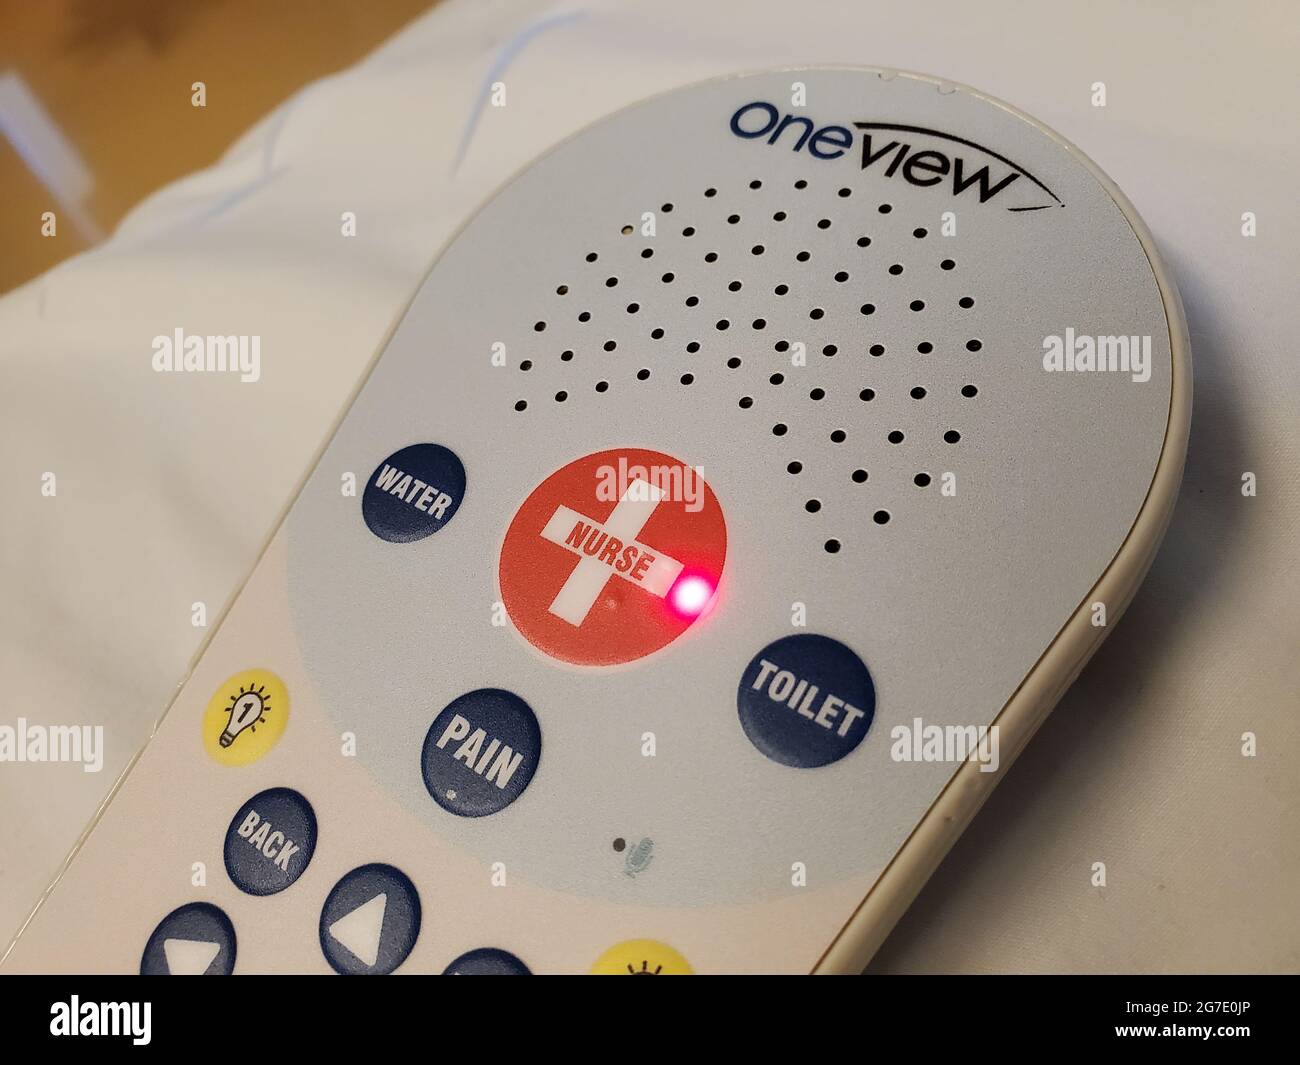 Close-up of OneView call light with Nurse button in a medical setting, San Francisco, California, May 20, 2021. () Stock Photo